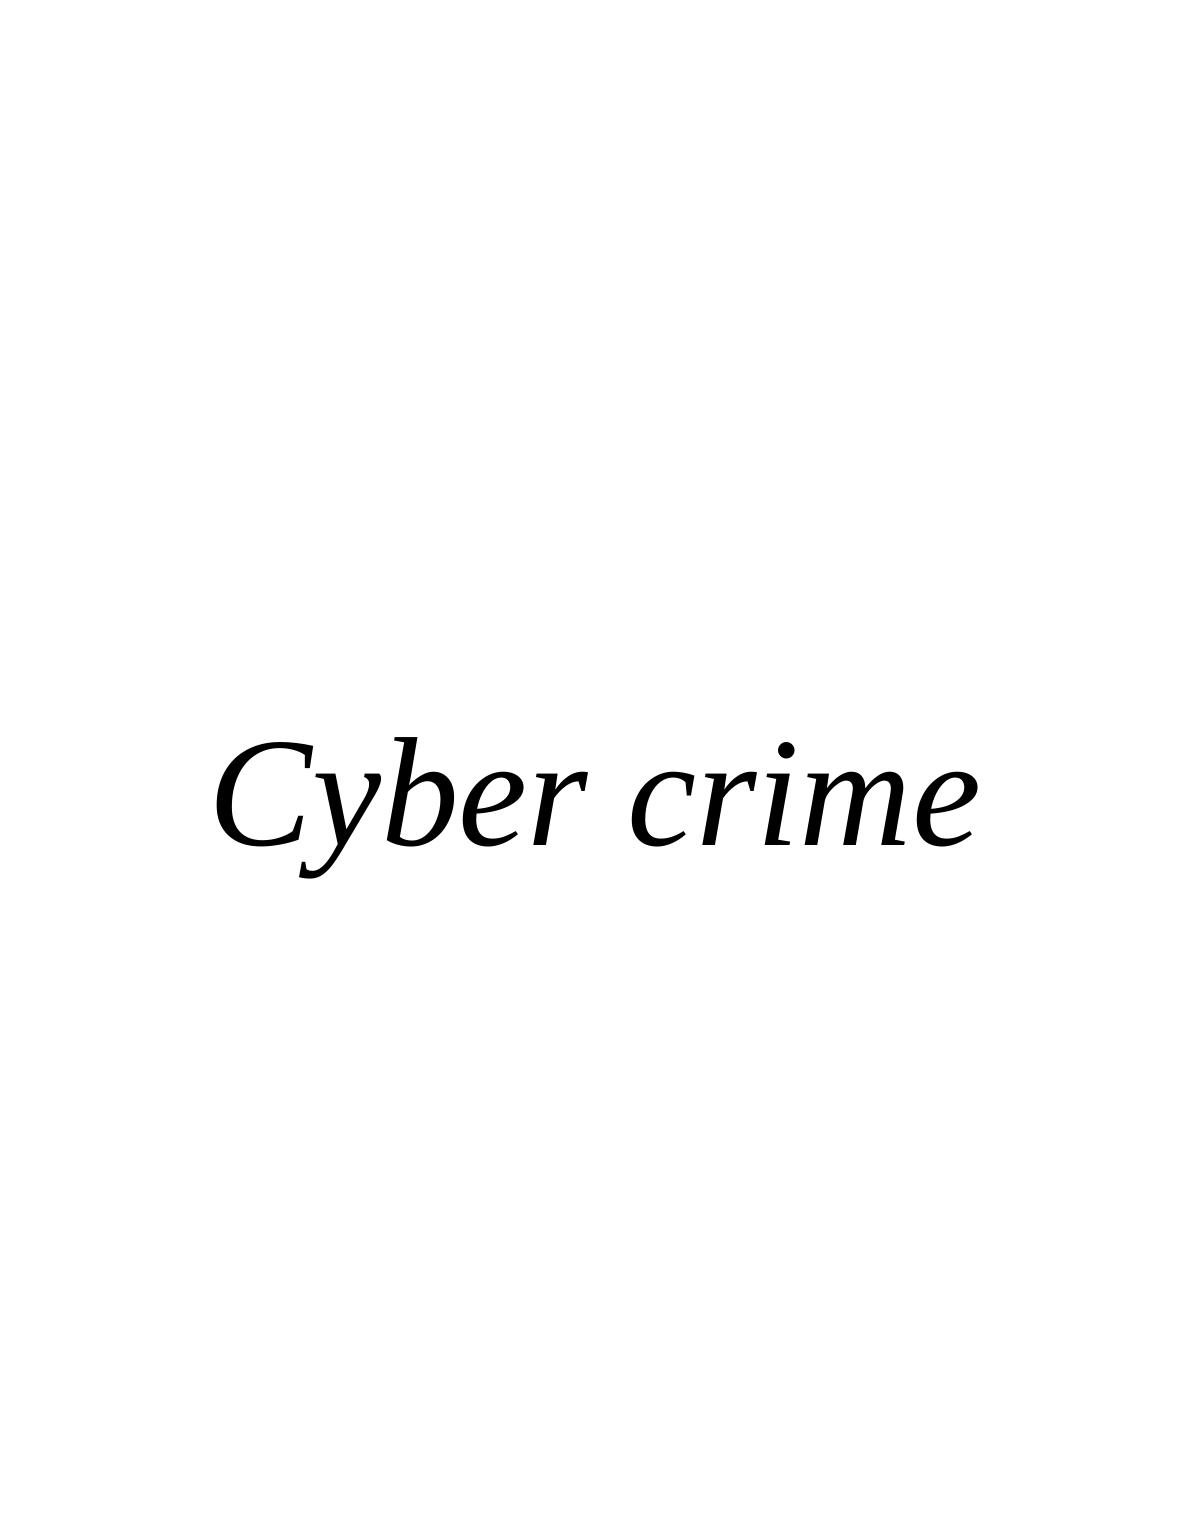 Understanding Cyber Crime: Motivations and Effects_1